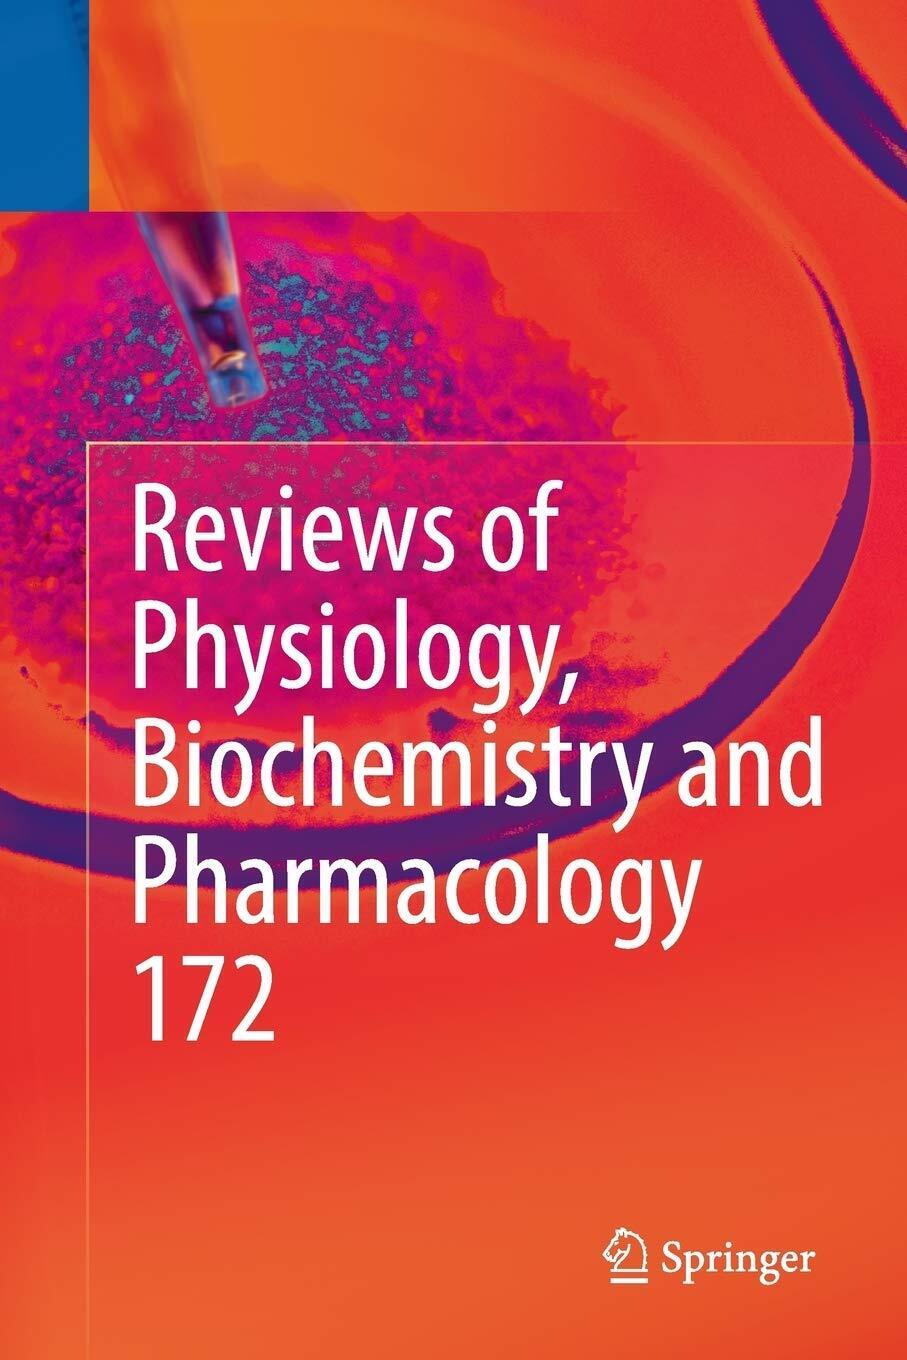 Reviews of Physiology, Biochemistry and Pharmacology, Vol. 172 - Springer, 2018